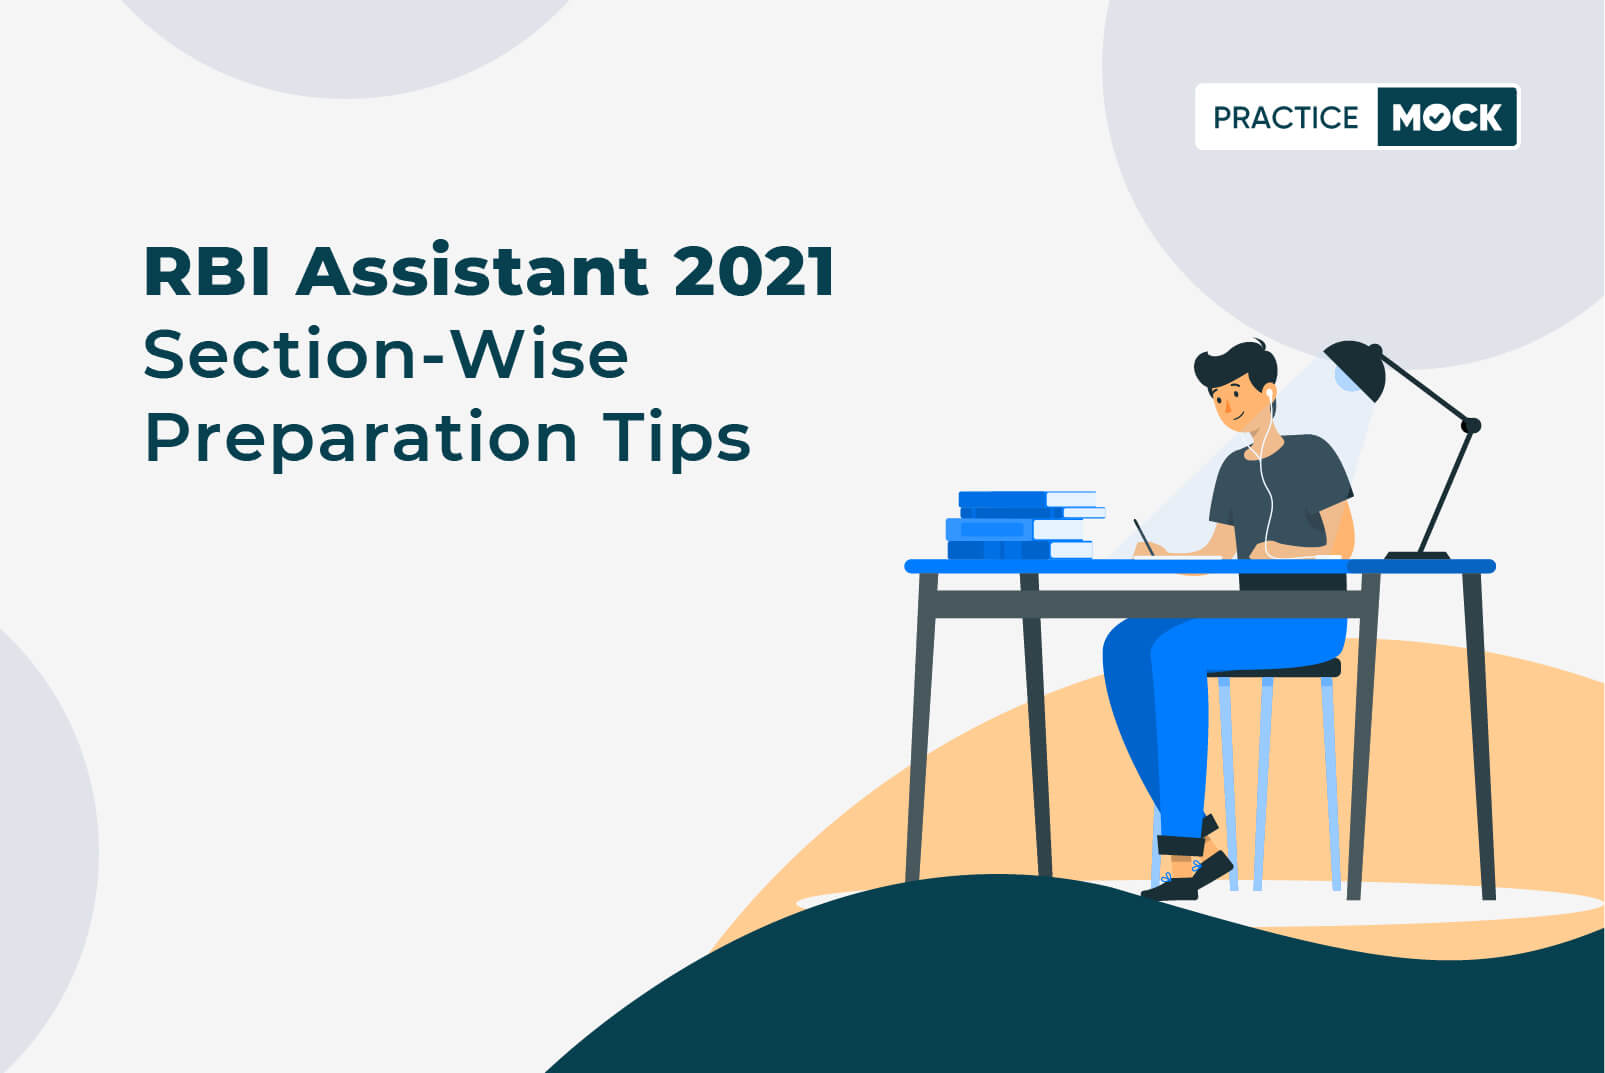 RBI Assistant Section-Wise Preparation Tips